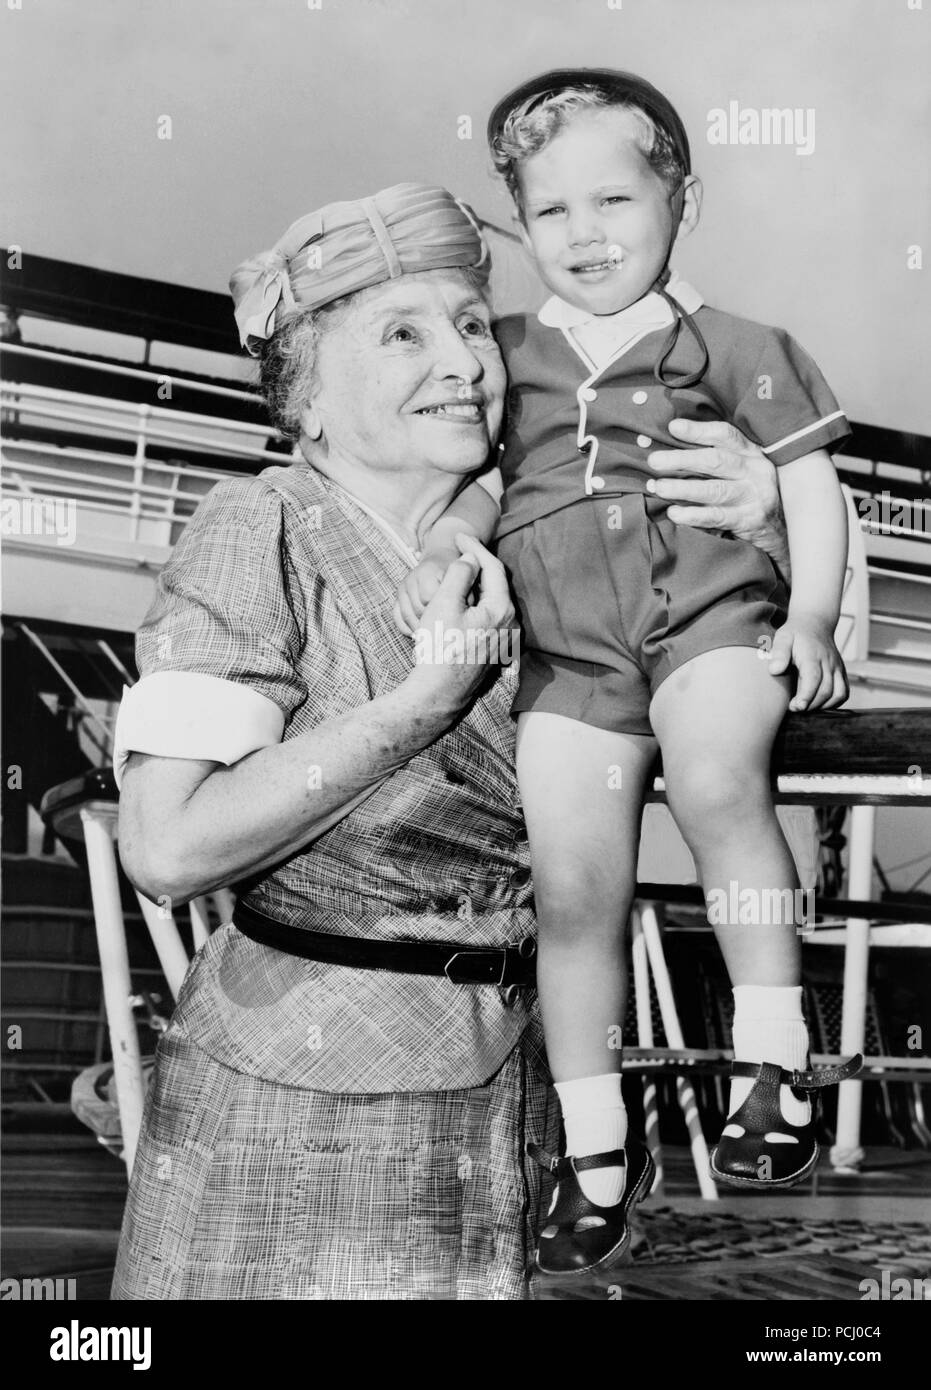 Helen Keller, left, with two-year-old Donald Hart on board the ocean liner Independence after the ship docked in 1956 at New York City, New York. Helen Keller (June 27, 1880 – June 1, 1968) was an American author, political activist, and lecturer. She was the first deaf-blind person to earn a bachelor of arts degree. Stock Photo